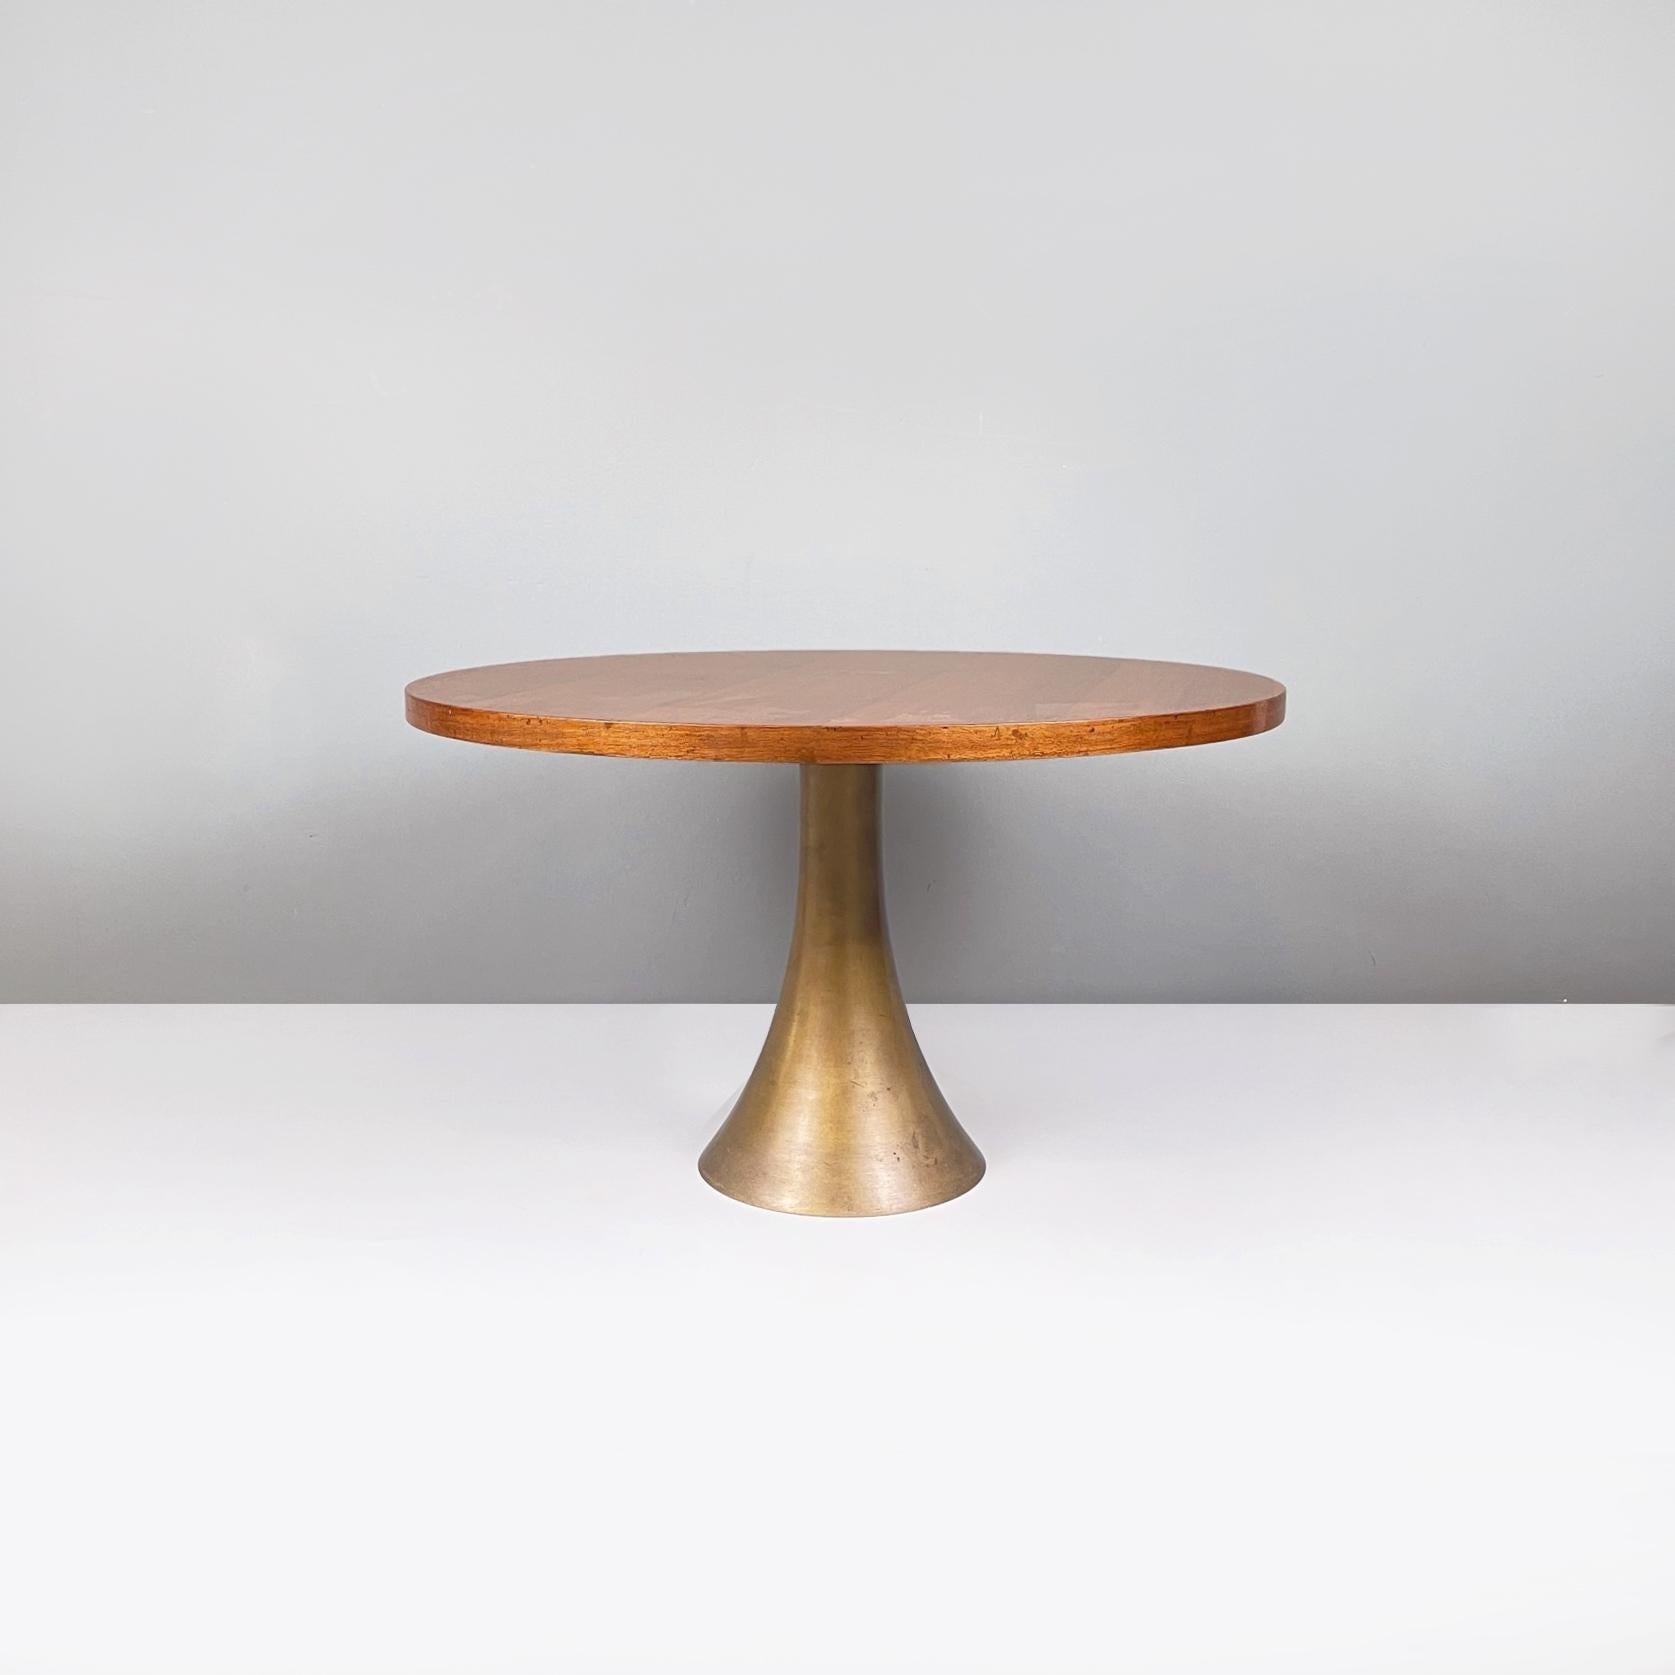 Italian midcentury Teak Coffee table 302 by Angelo Mangiarotti for Bernini, 1960s
Coffee table mod. 302 with round top in teak. The bronze base is conical in shape. Produced by Bernini in 1960sand designed by Angelo Mangiarotti.
Good conditions,